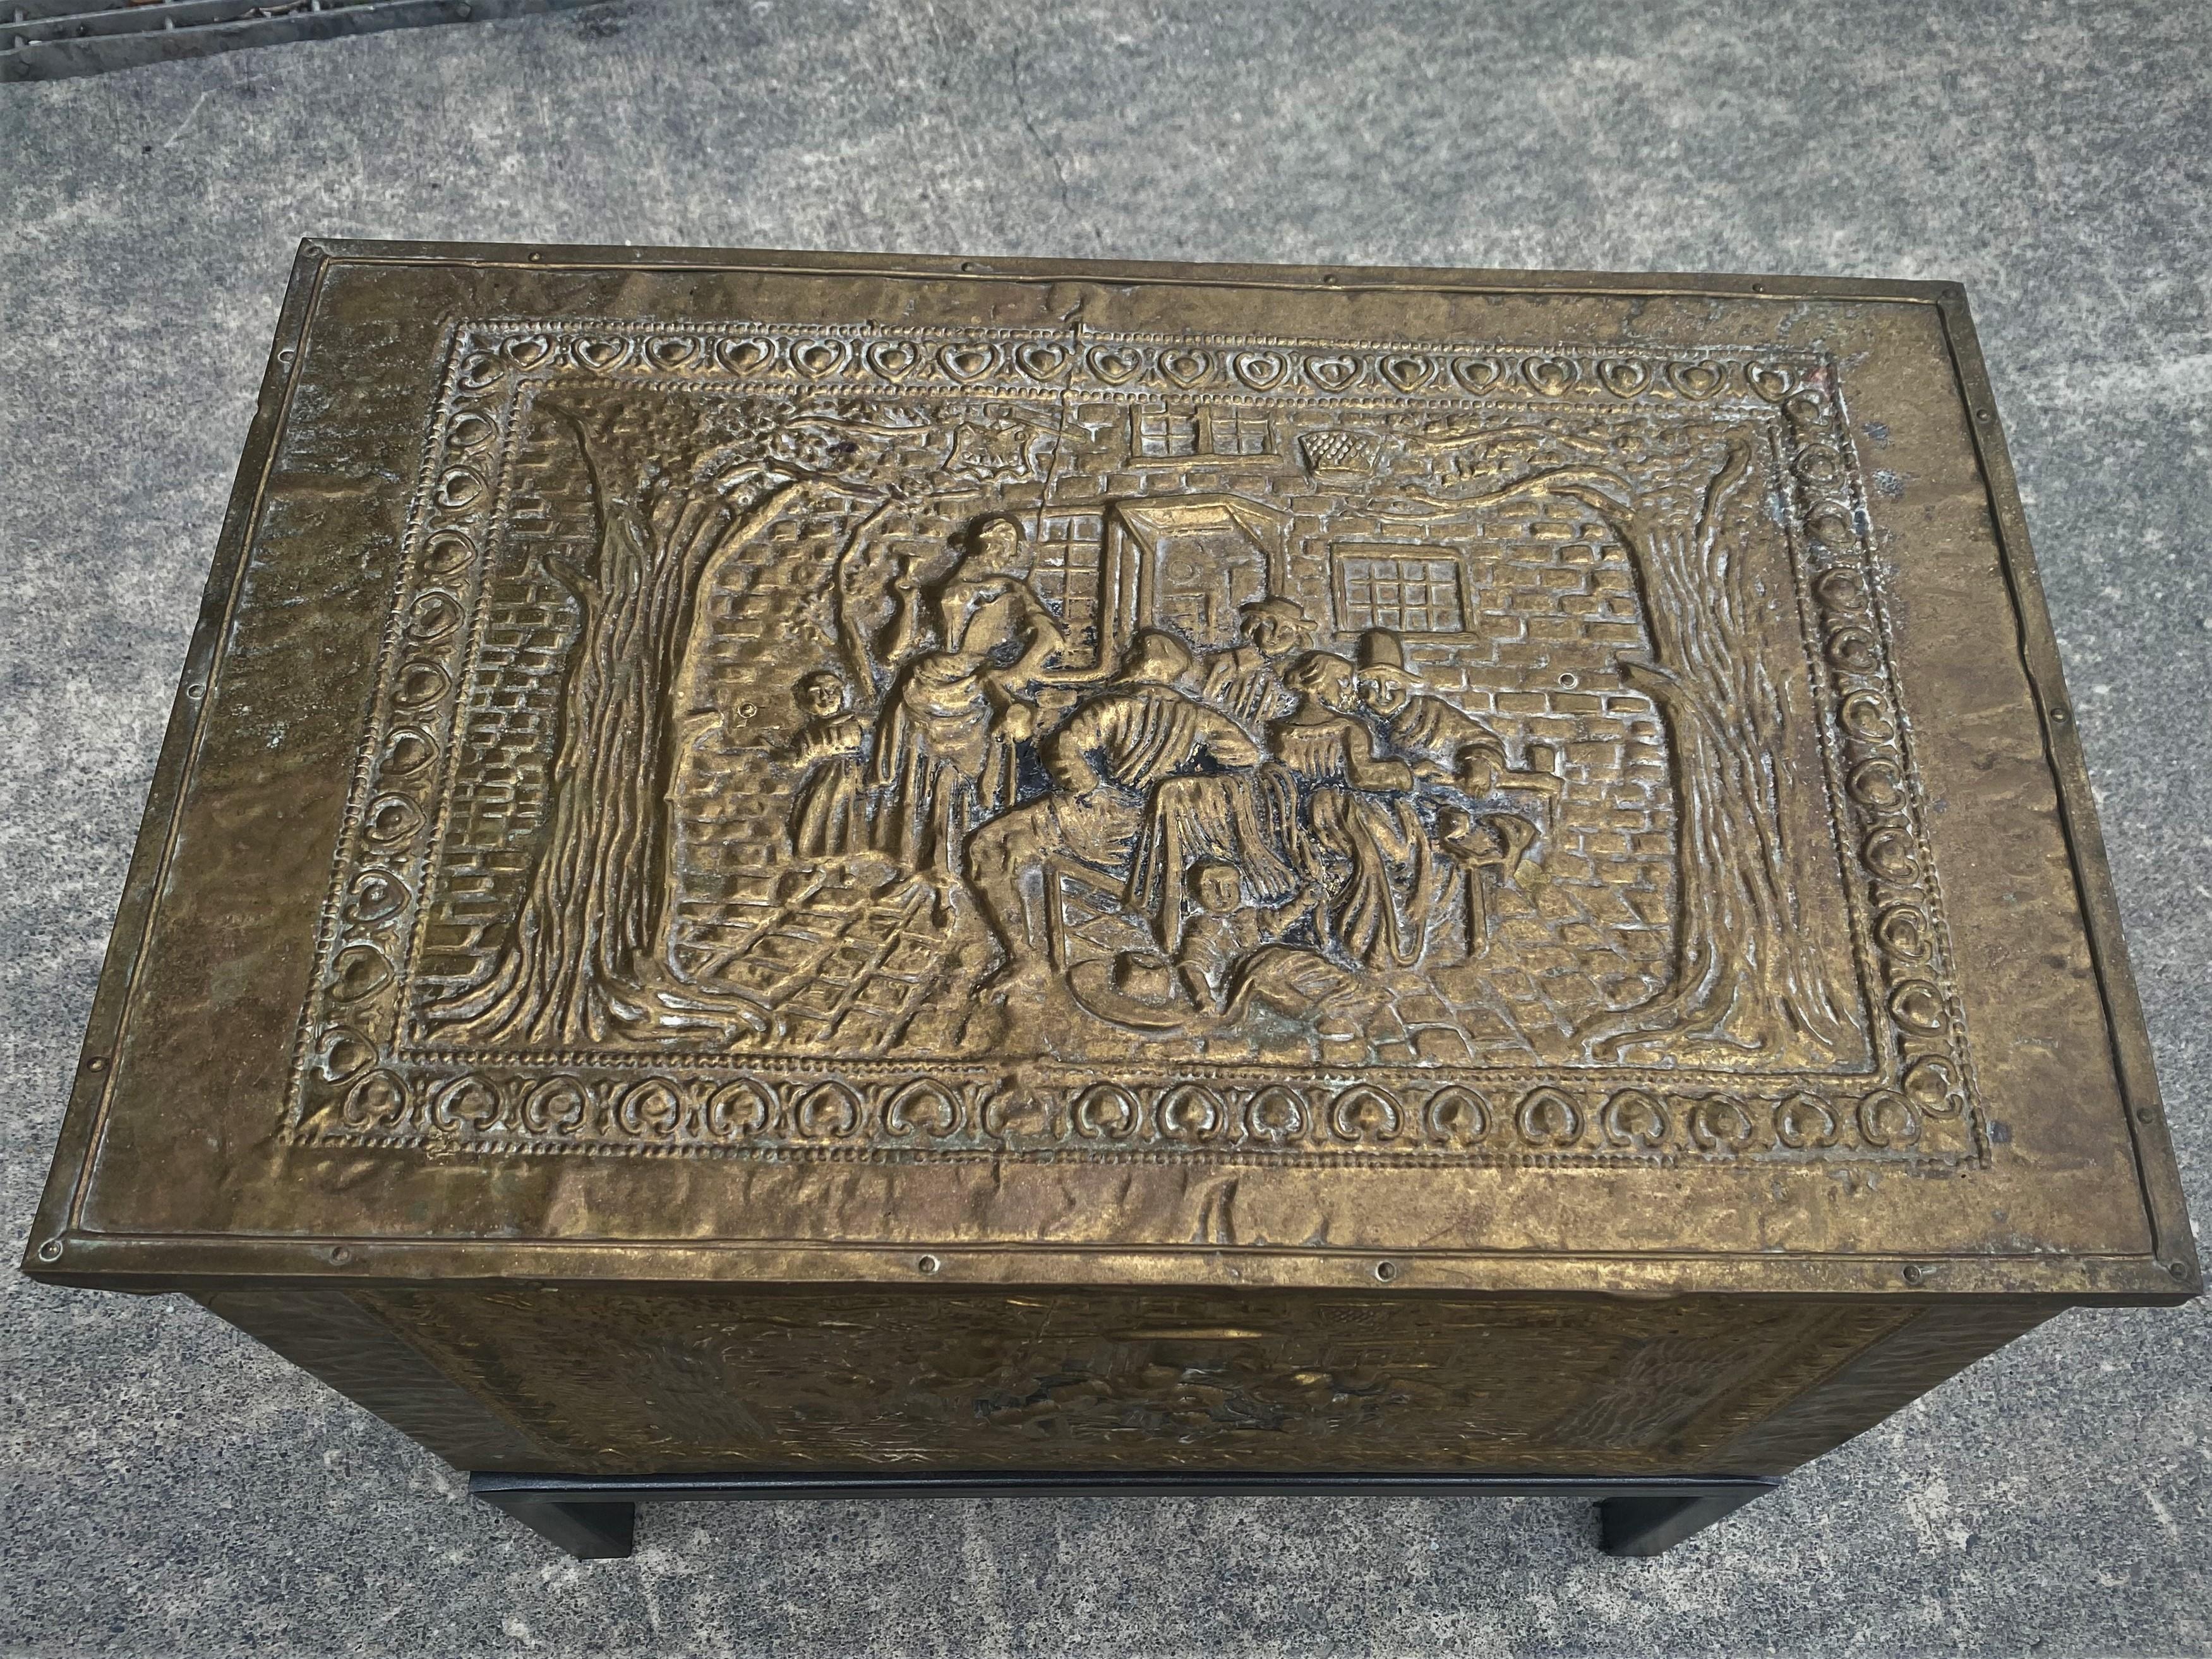 Here is a decorative and functional pressed brass lift lid box with a zinc liner and an iron base which has been added. The top and front have an impressed scene depicting a group who appear to be eating and drinking in front of a brick building and